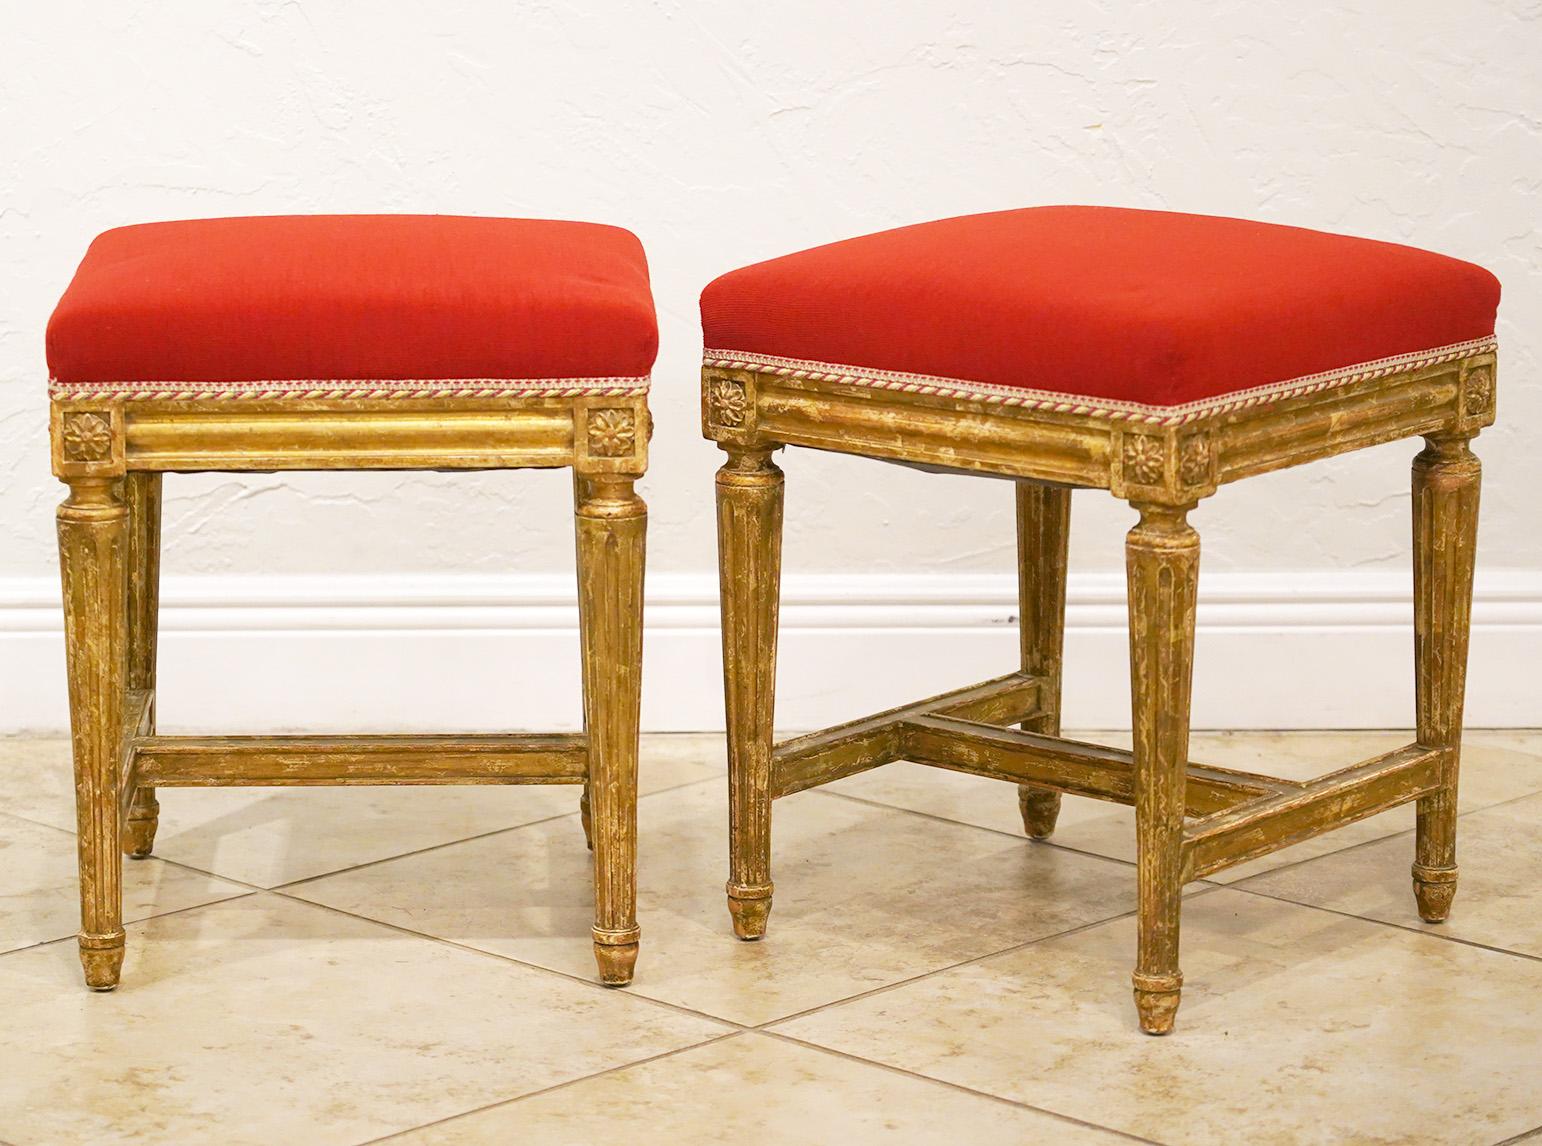 With their Venetian red seats this elegant pair of French Louis XVI style benches or stools are truly spectacular. Connected by fluted seat frames they rest on round tapering fluted legs topped by carved rosettes and united by lower stretchers. The